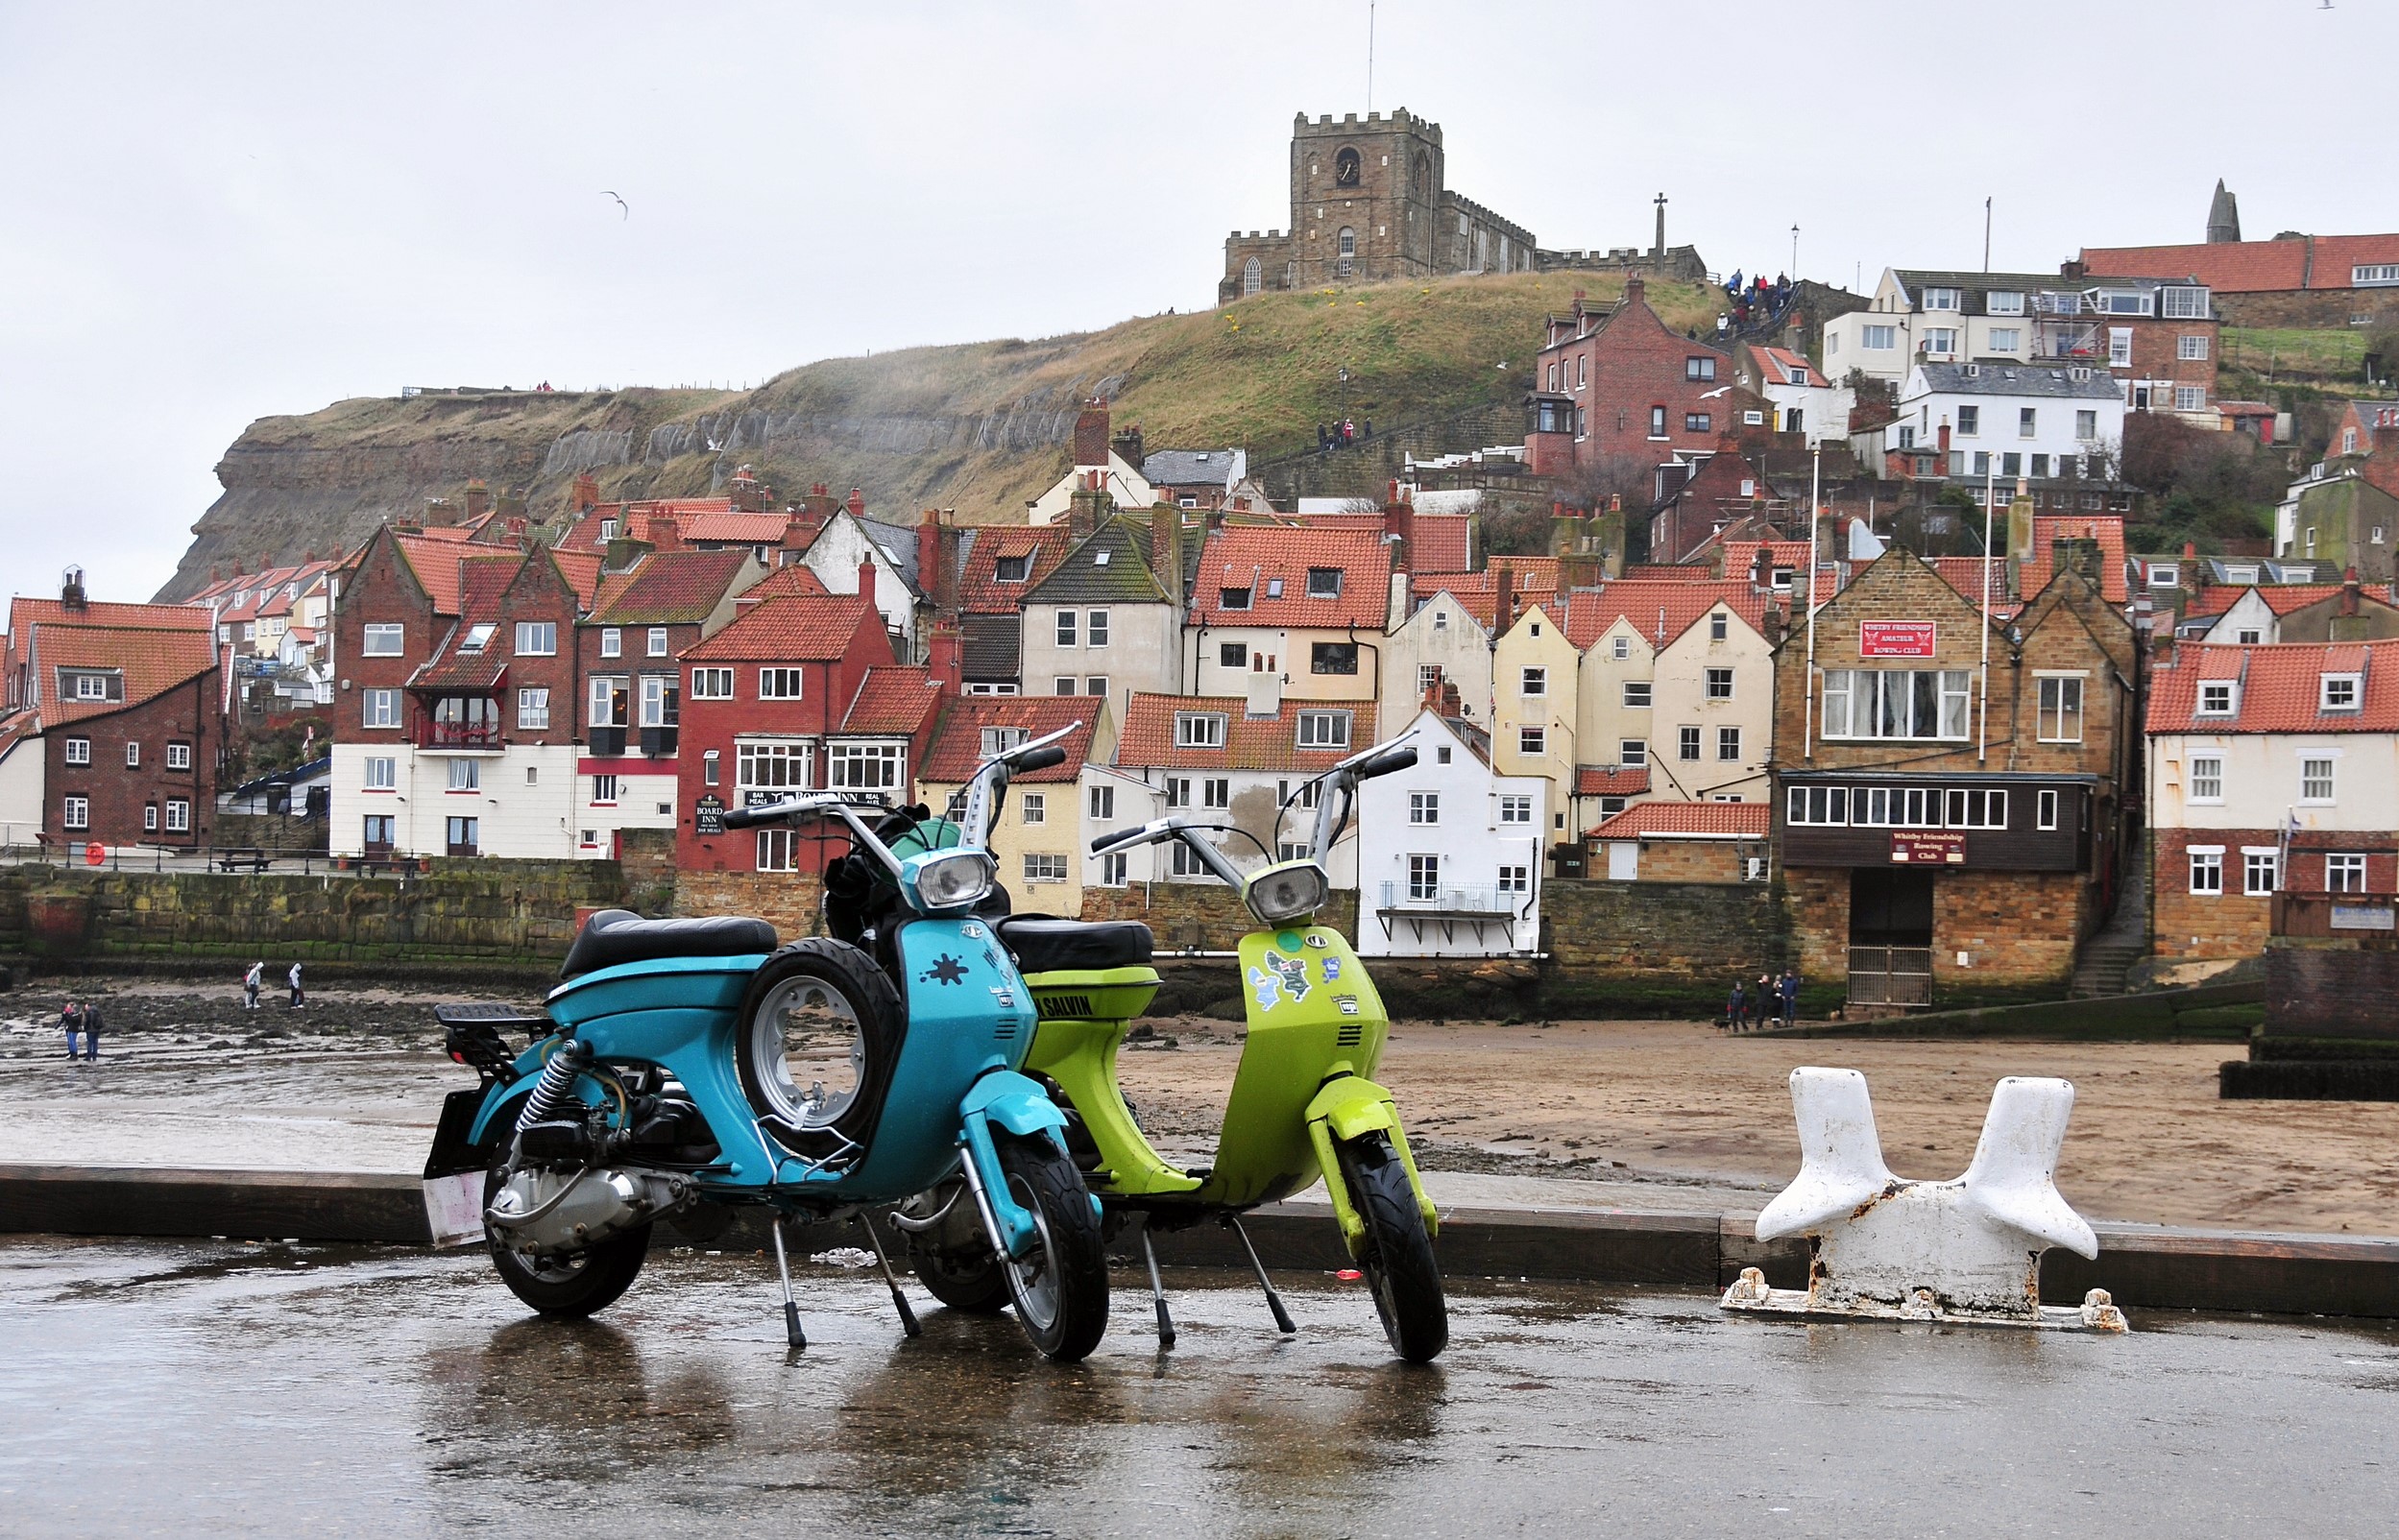 Scooters in Whitby